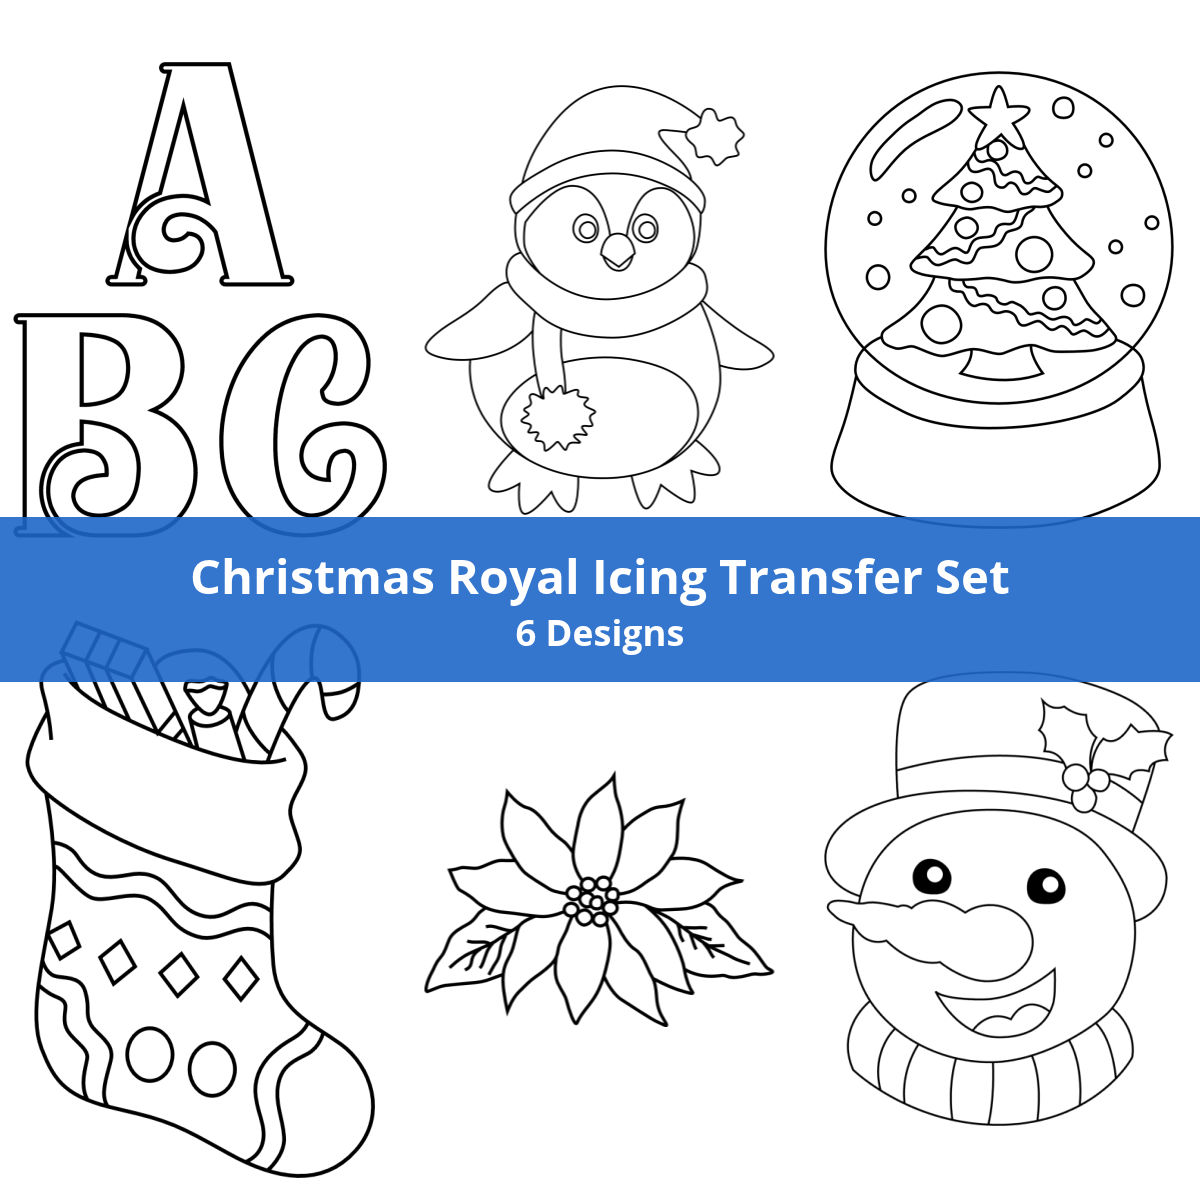 Template Transfer Sheets to Make Royal Icing Transfers - Leaves